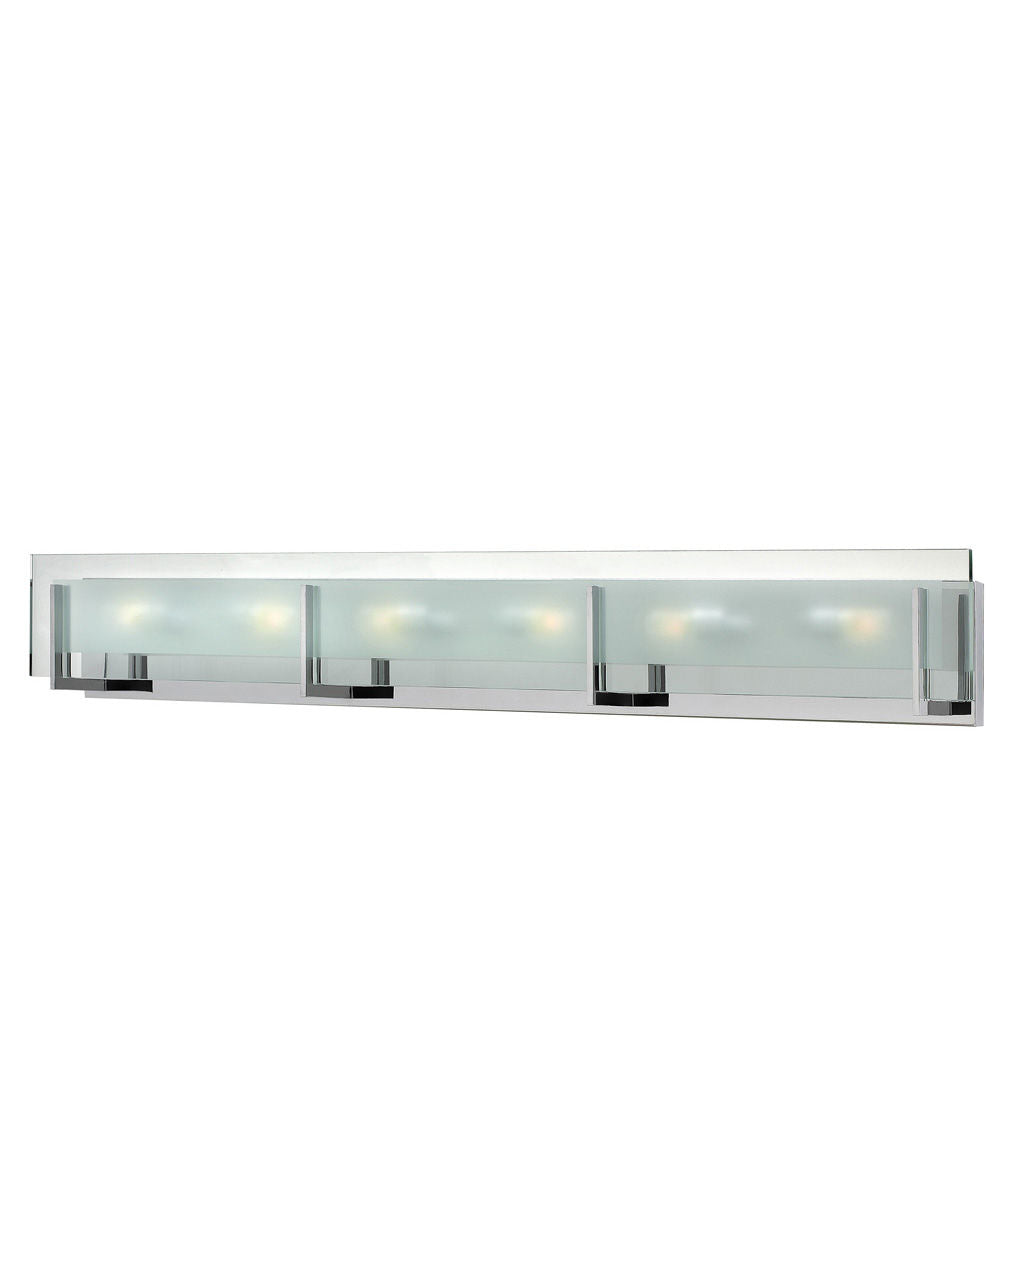 Hinkley Latitude Vanity Wall Sconce Collection